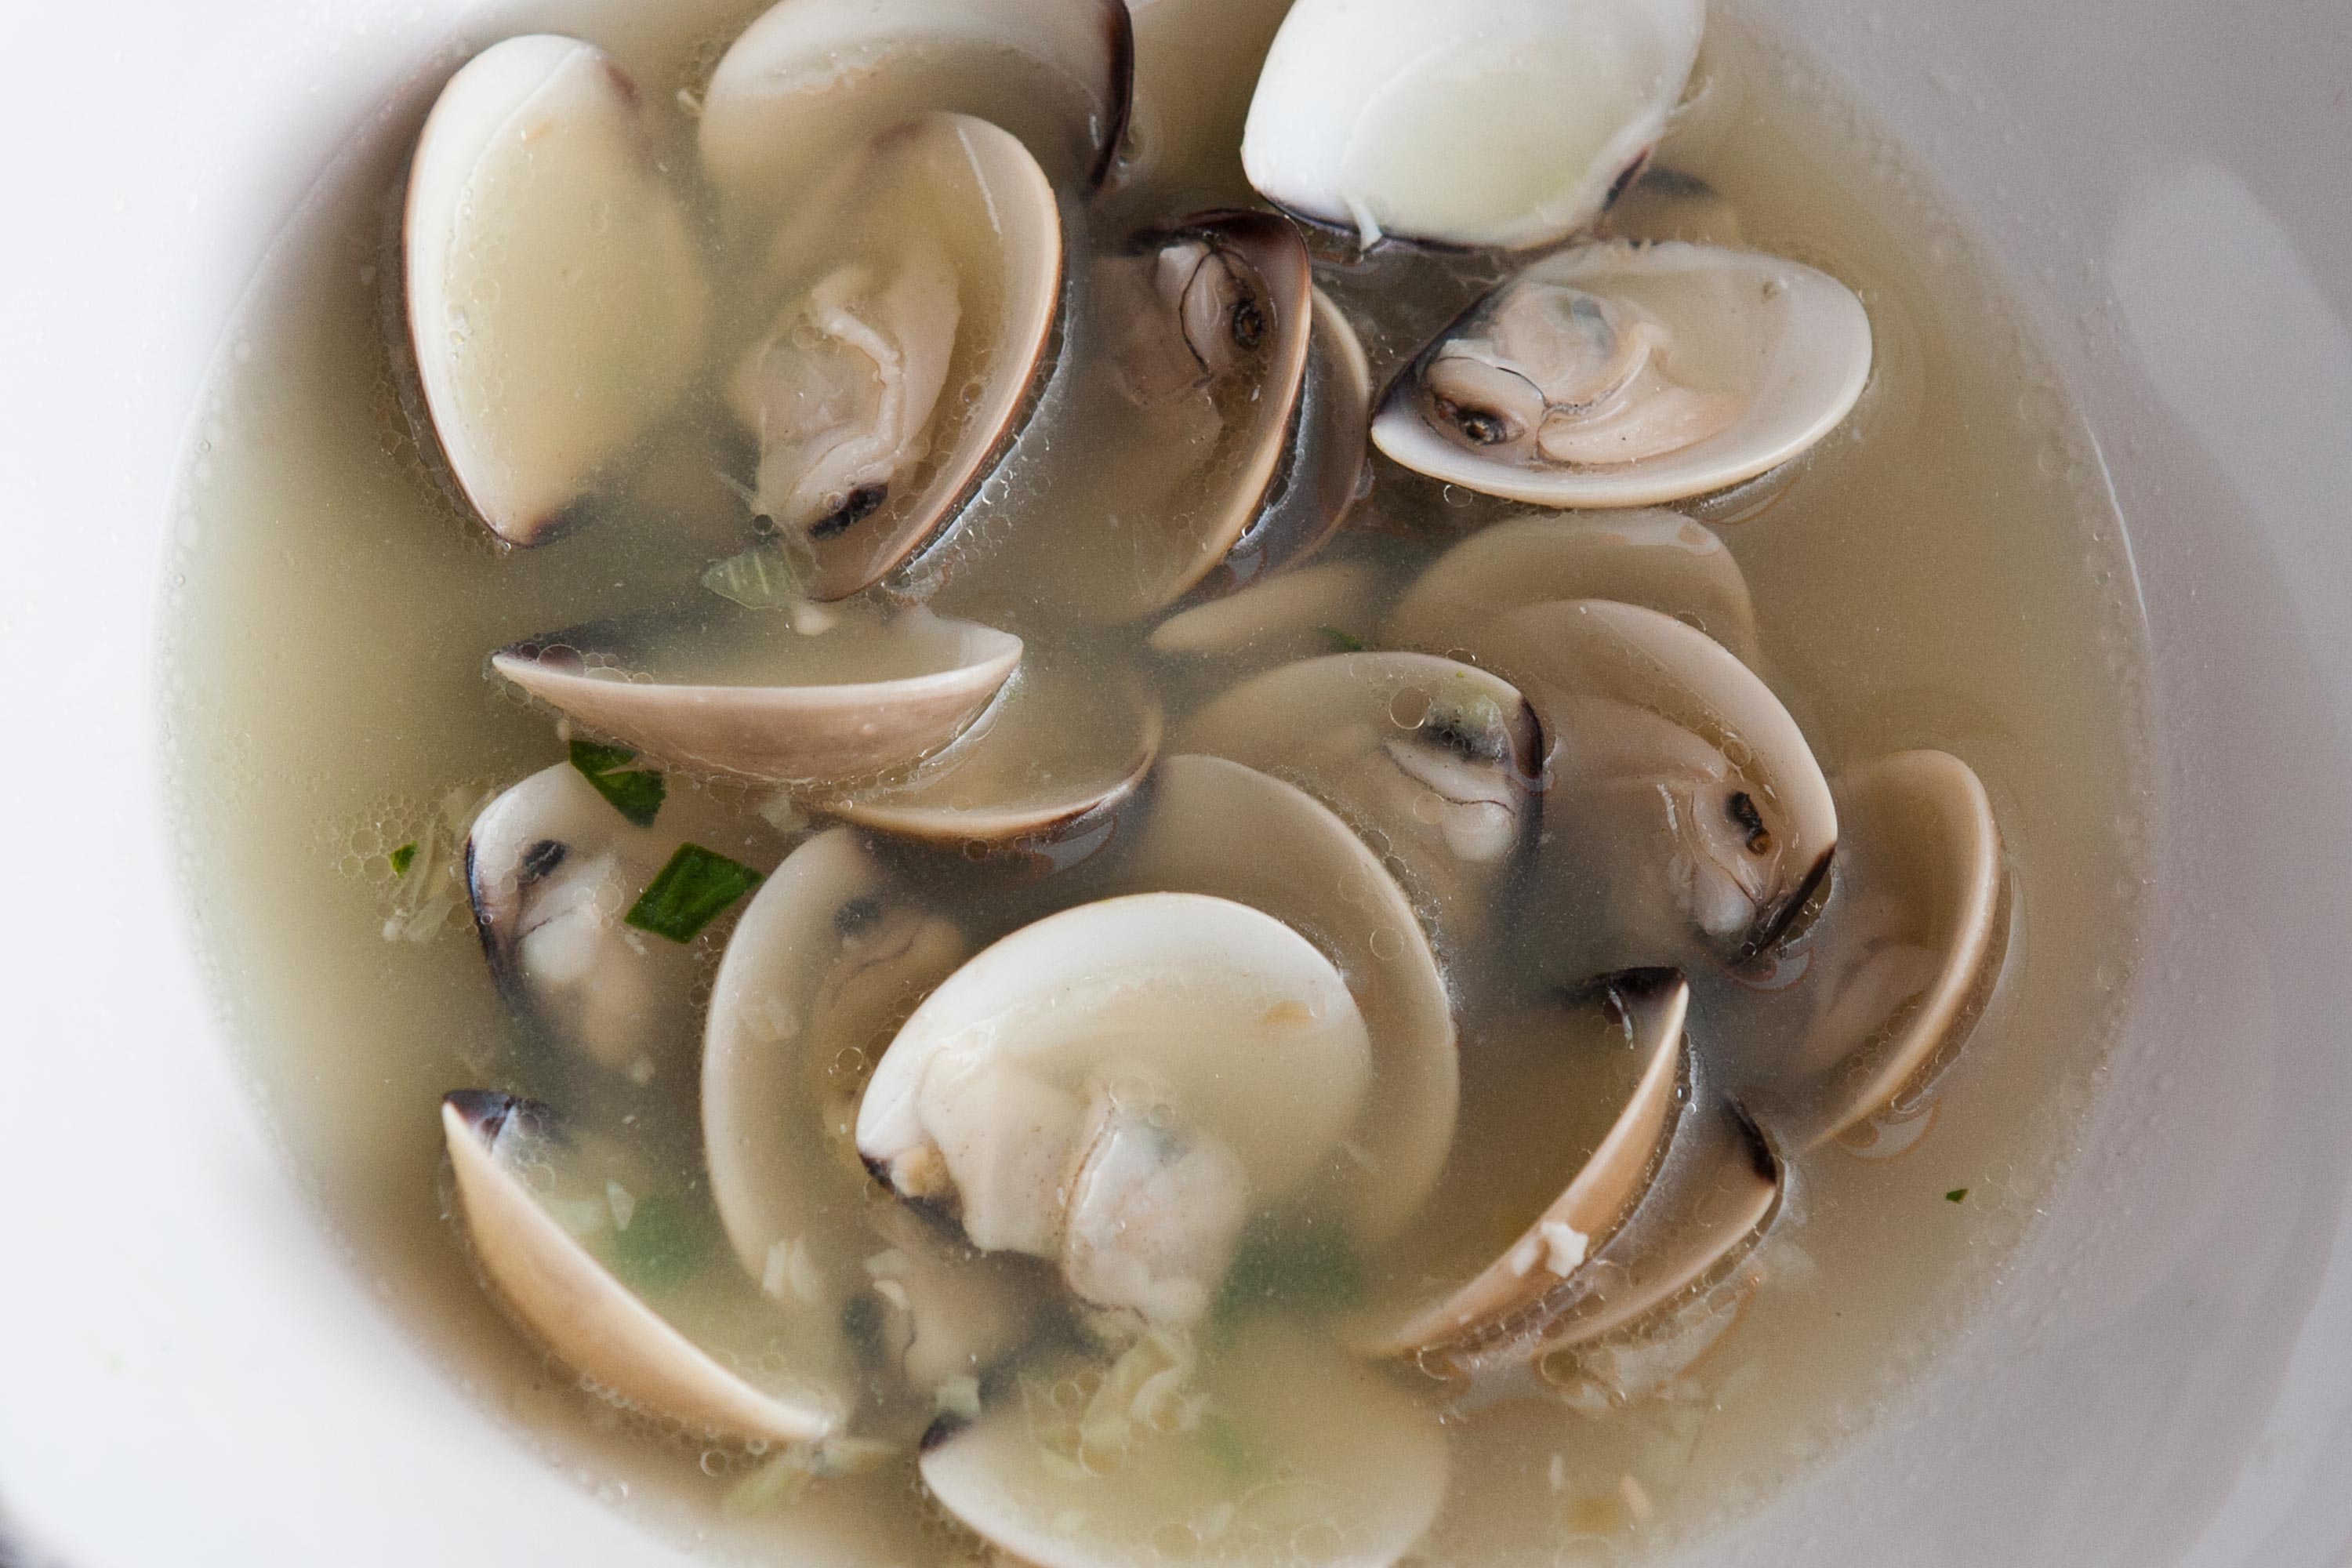 How to Cook and Eat Steamer Clams